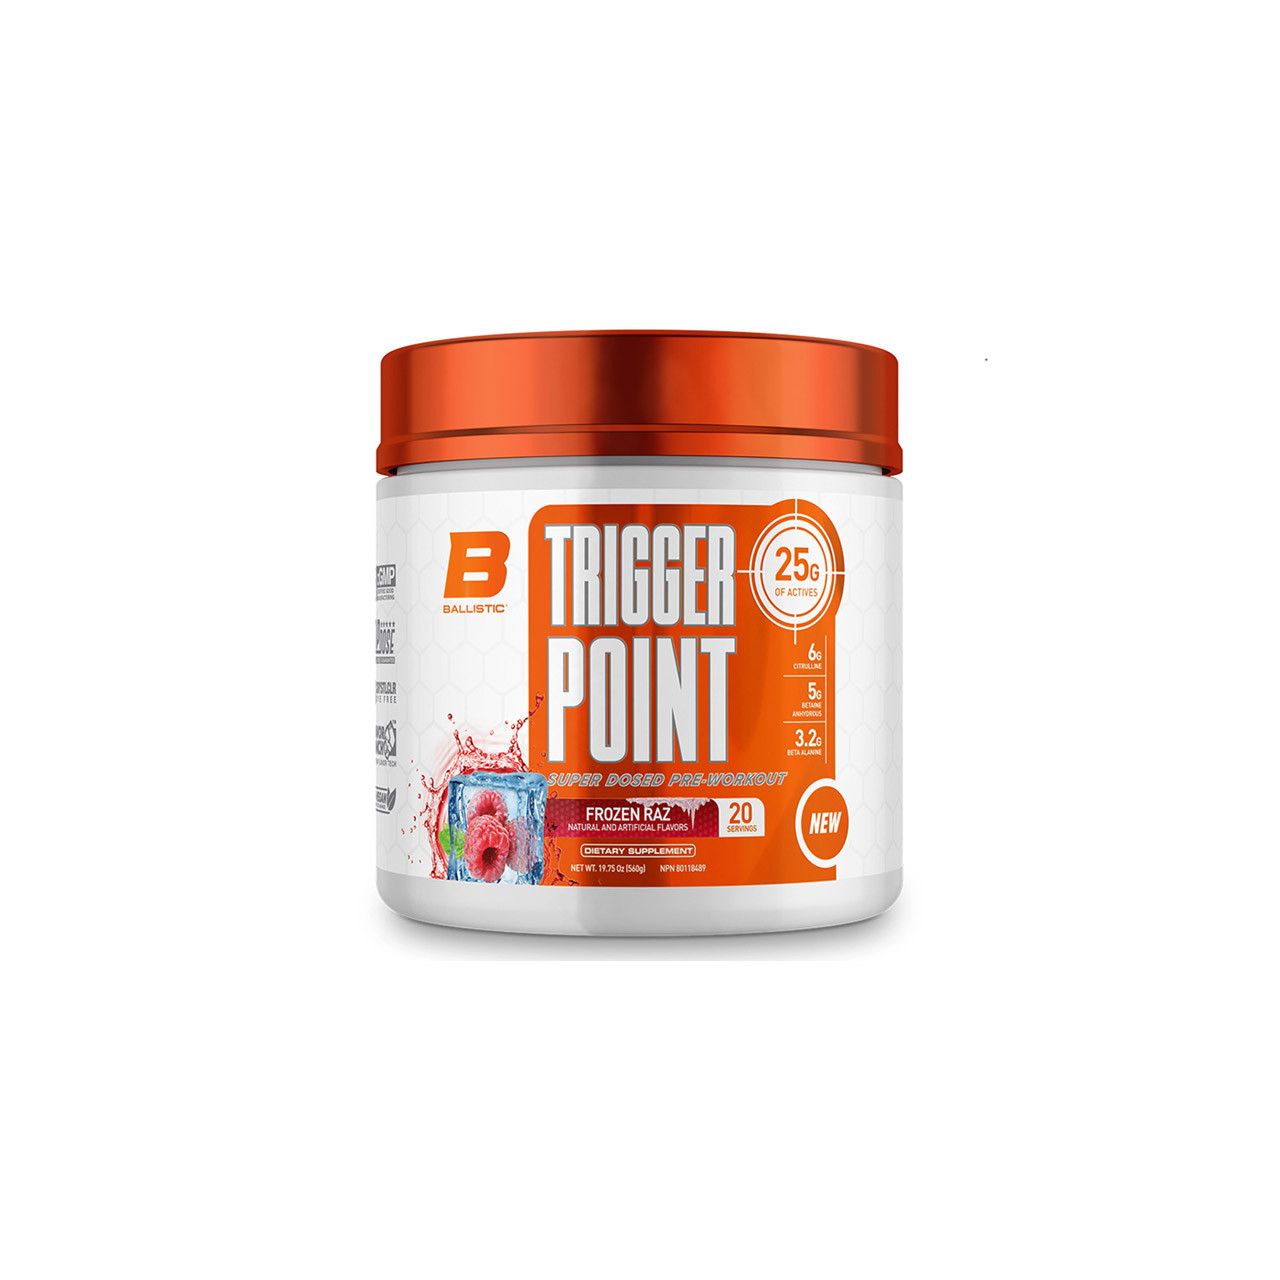 https://cdn11.bigcommerce.com/s-x48cg8/images/stencil/1280x1280/products/5400/14940/Ballistic_Trigger_Point_Pre-Workout_20_Serving__90685.1700713958.jpg?c=2?imbypass=on